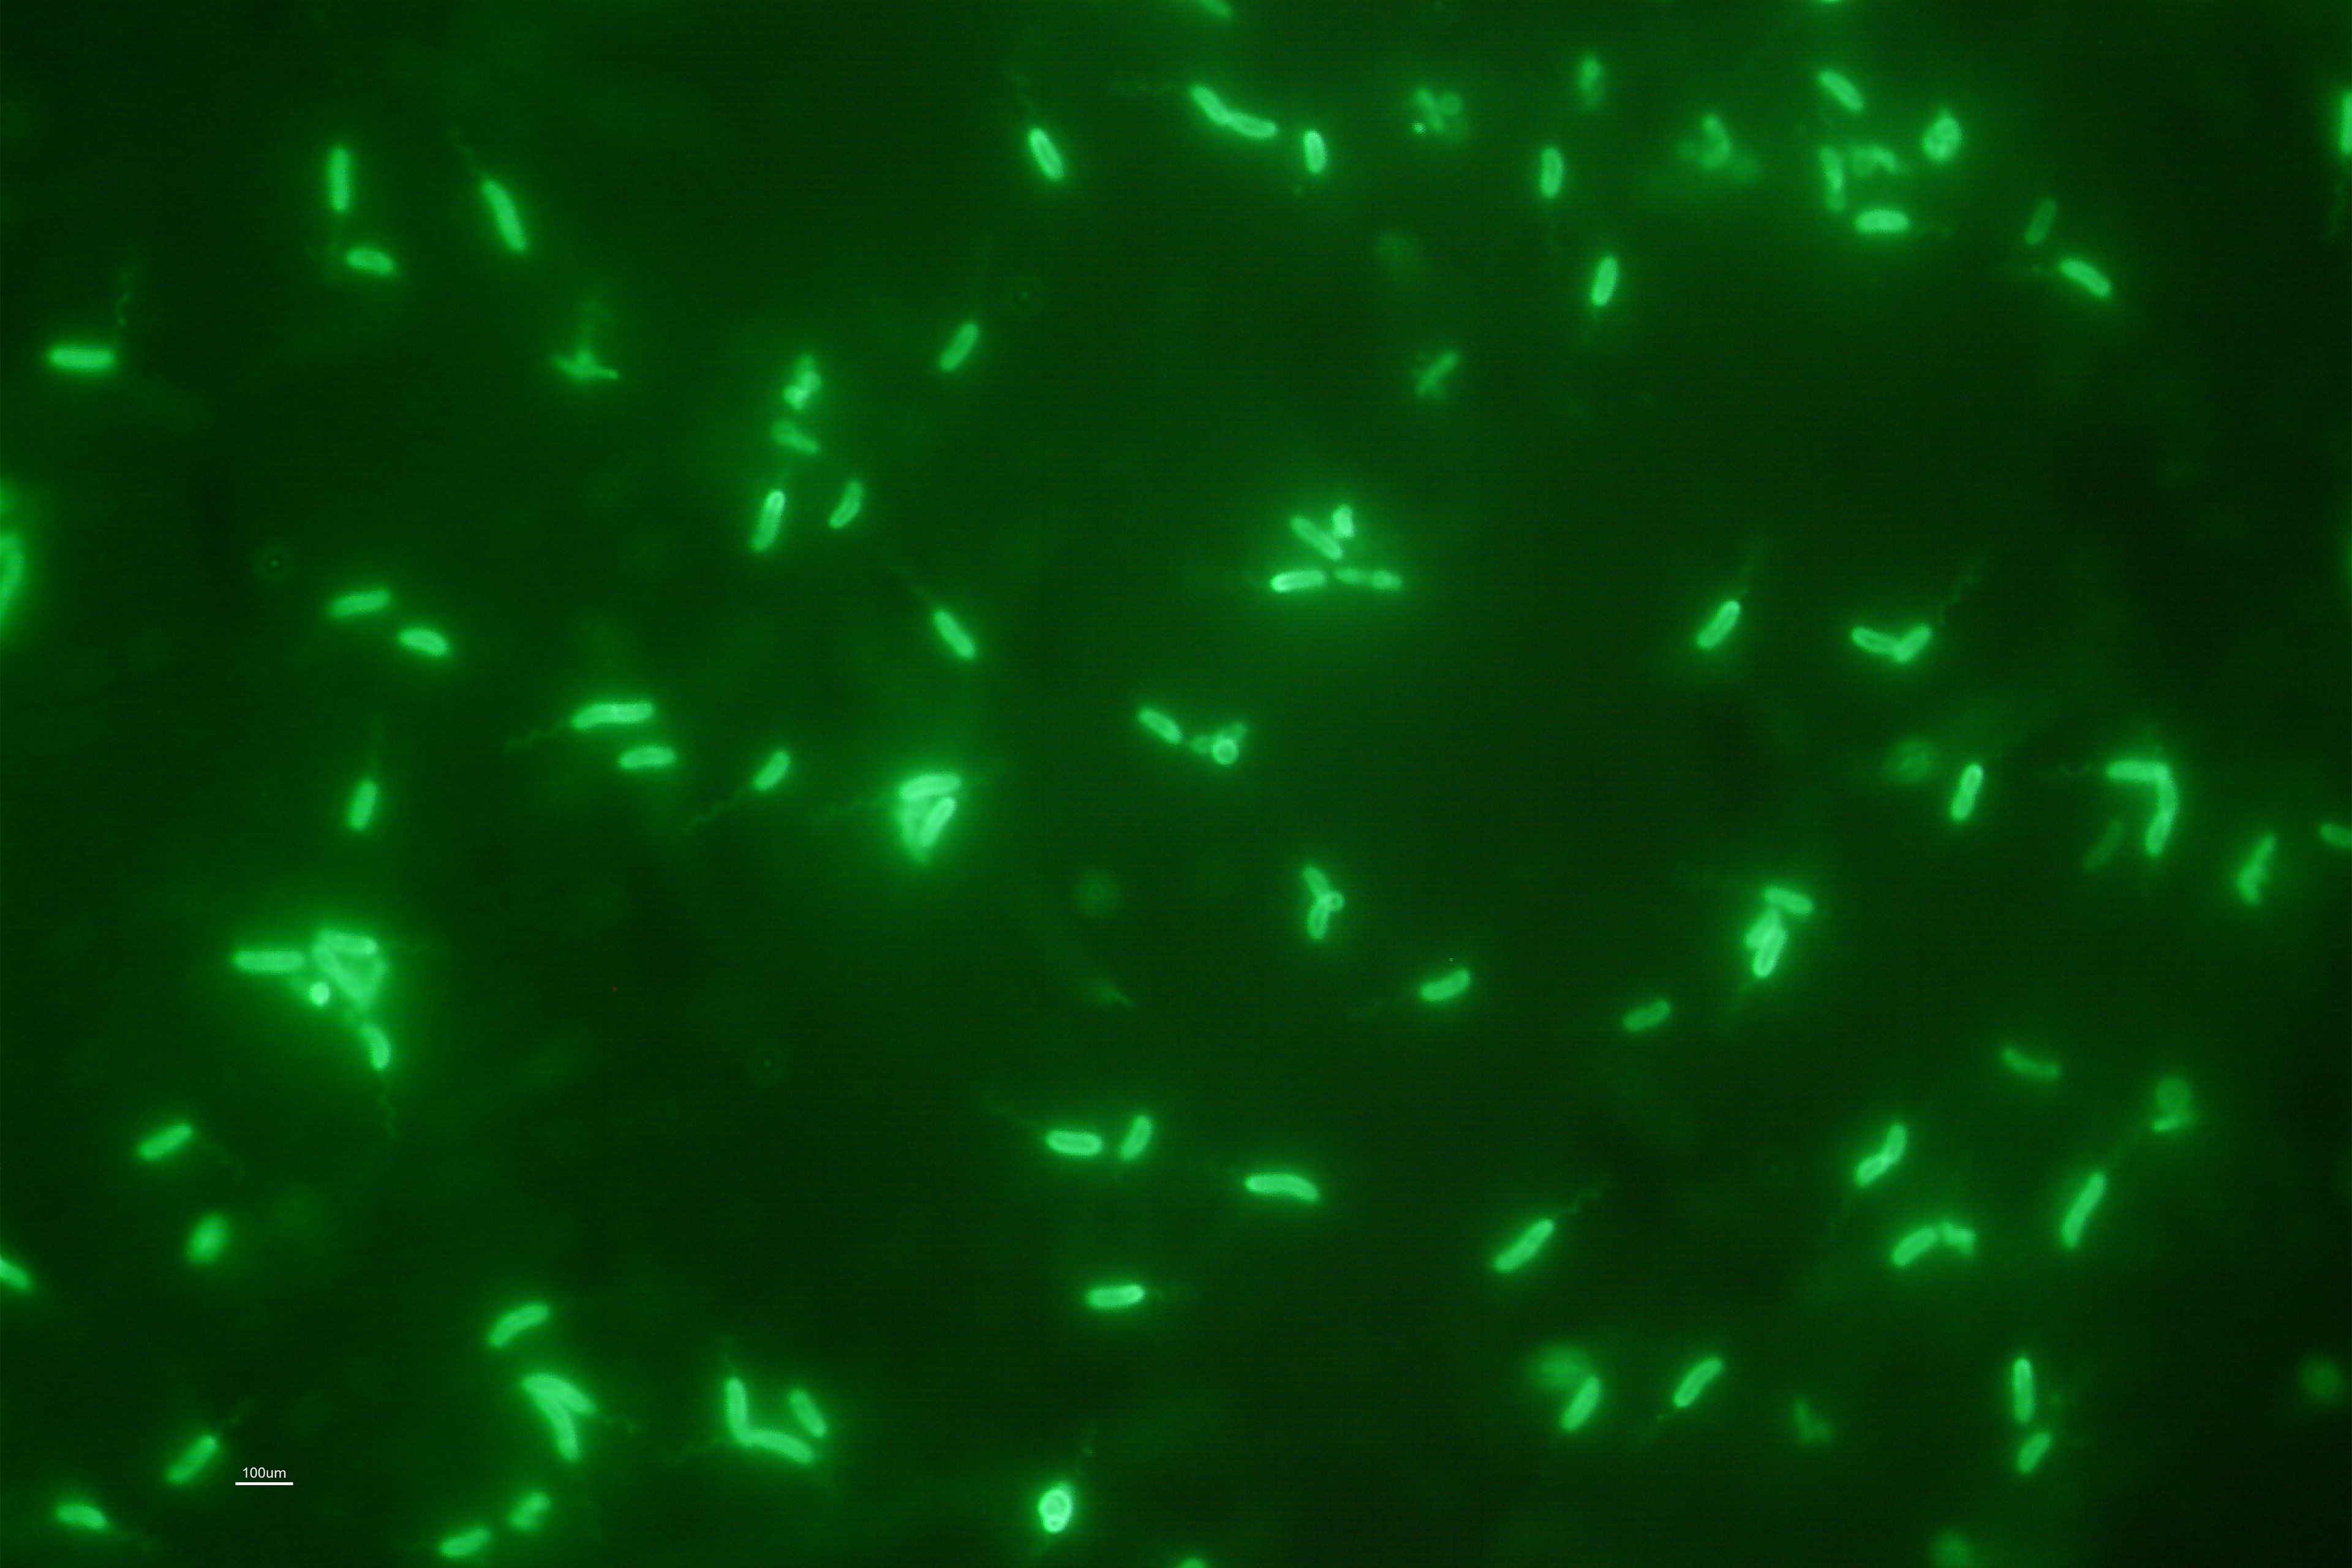 A photo of a green magnified image of bacteria.